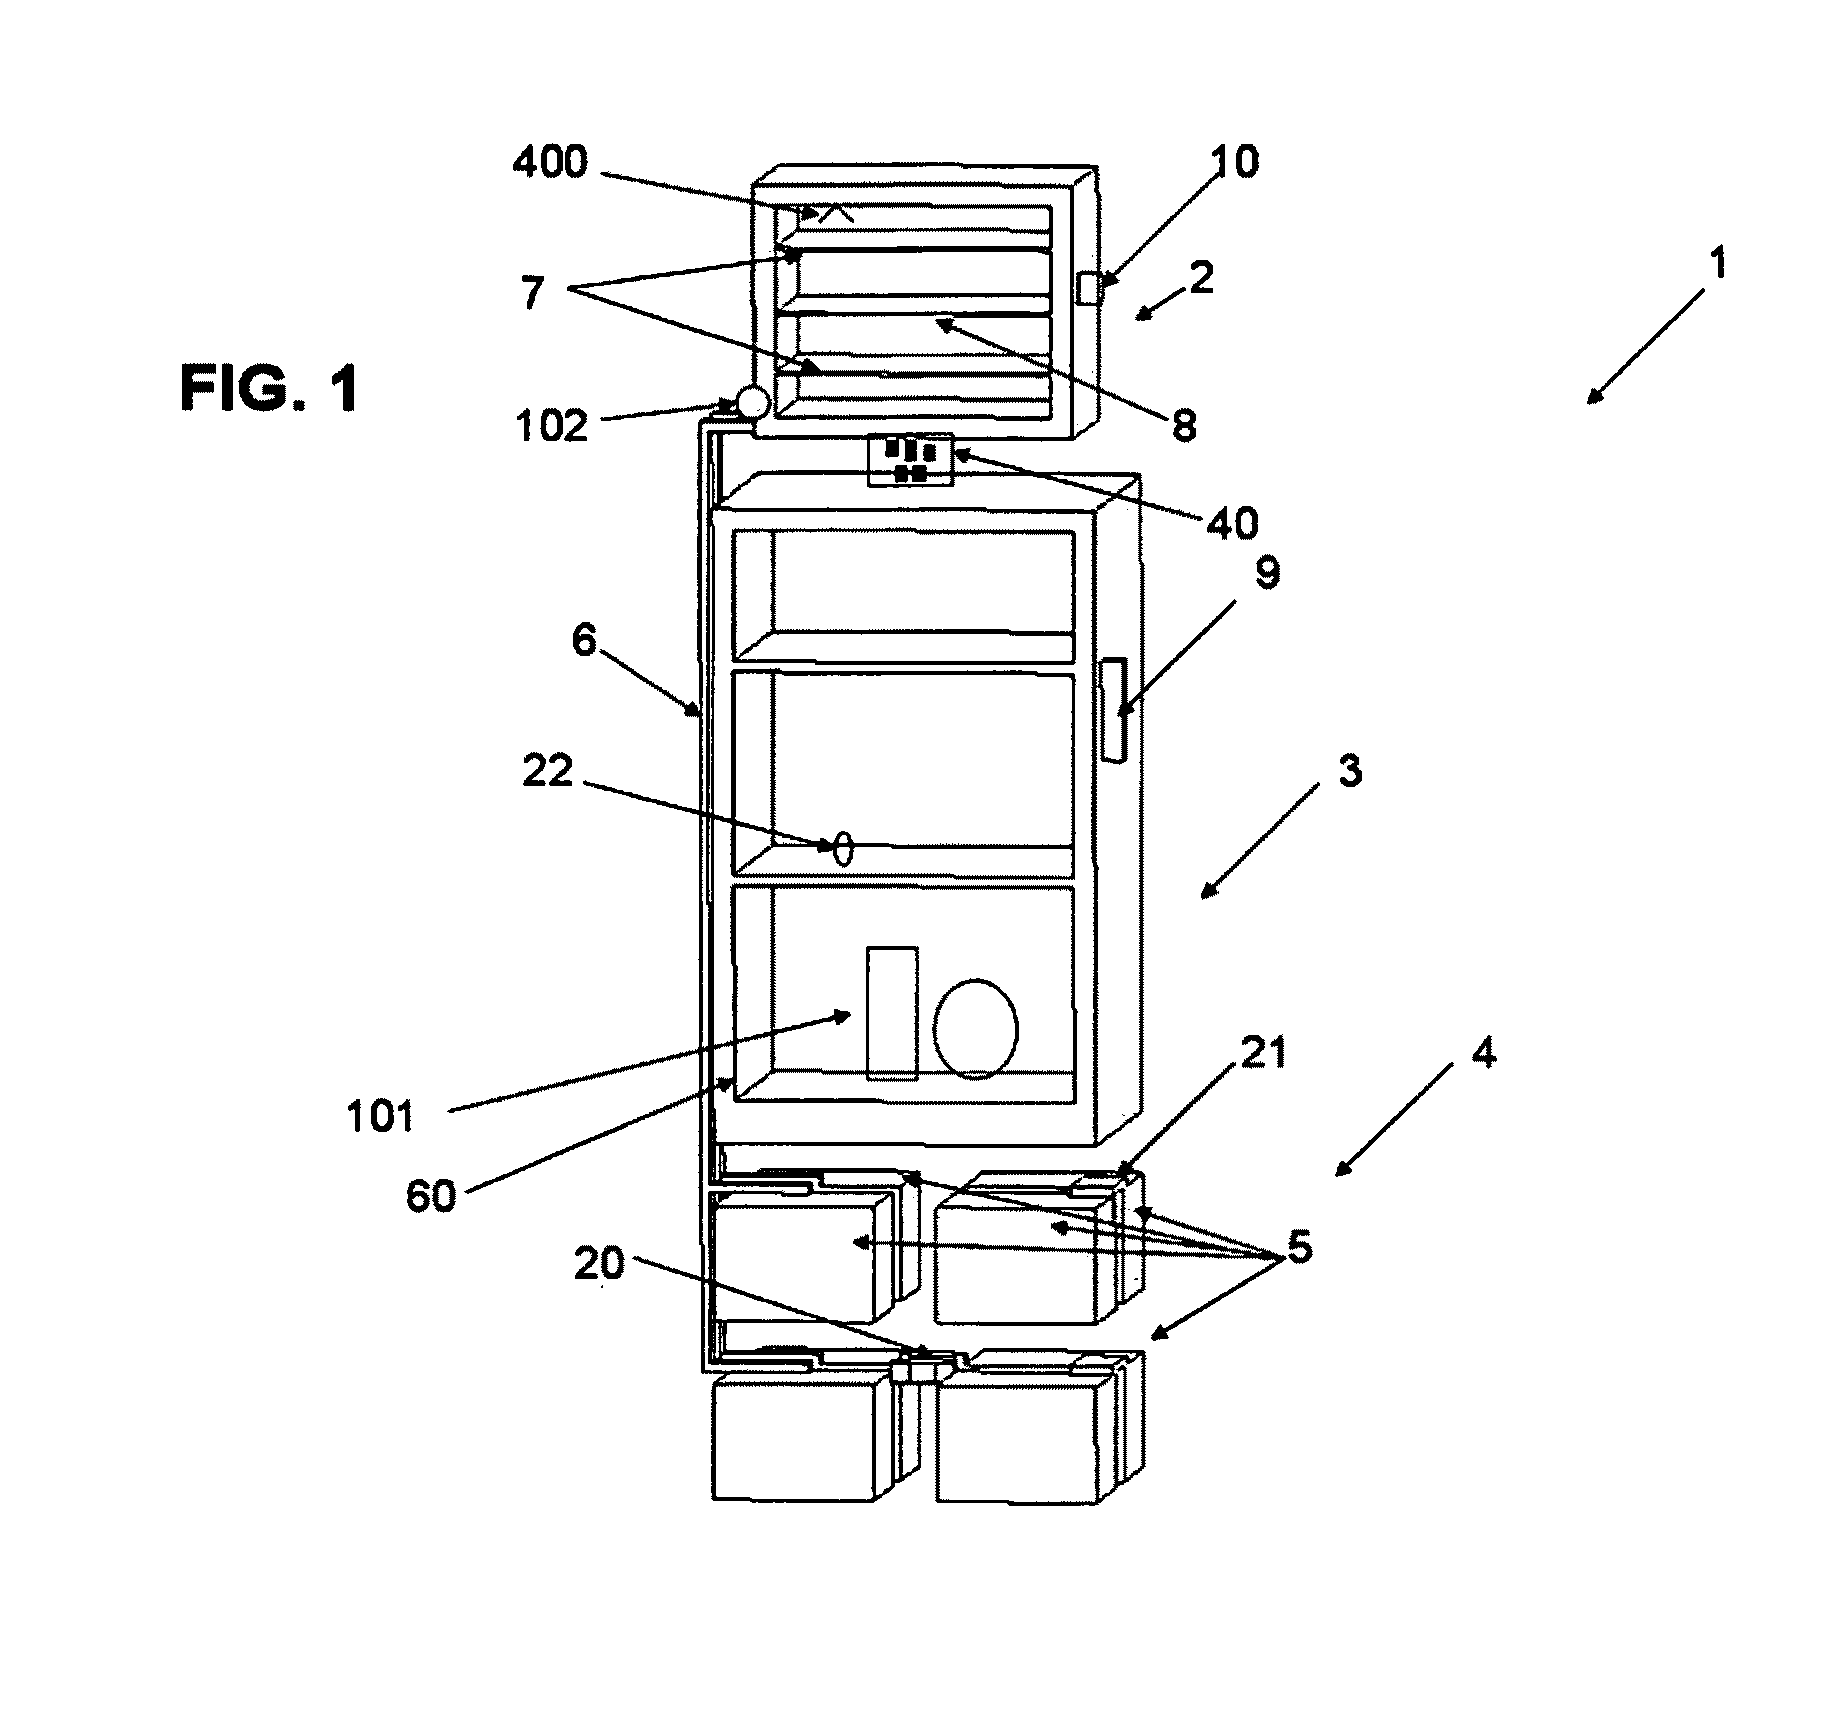 Food vending machine system incorporating a high speed stored energy oven